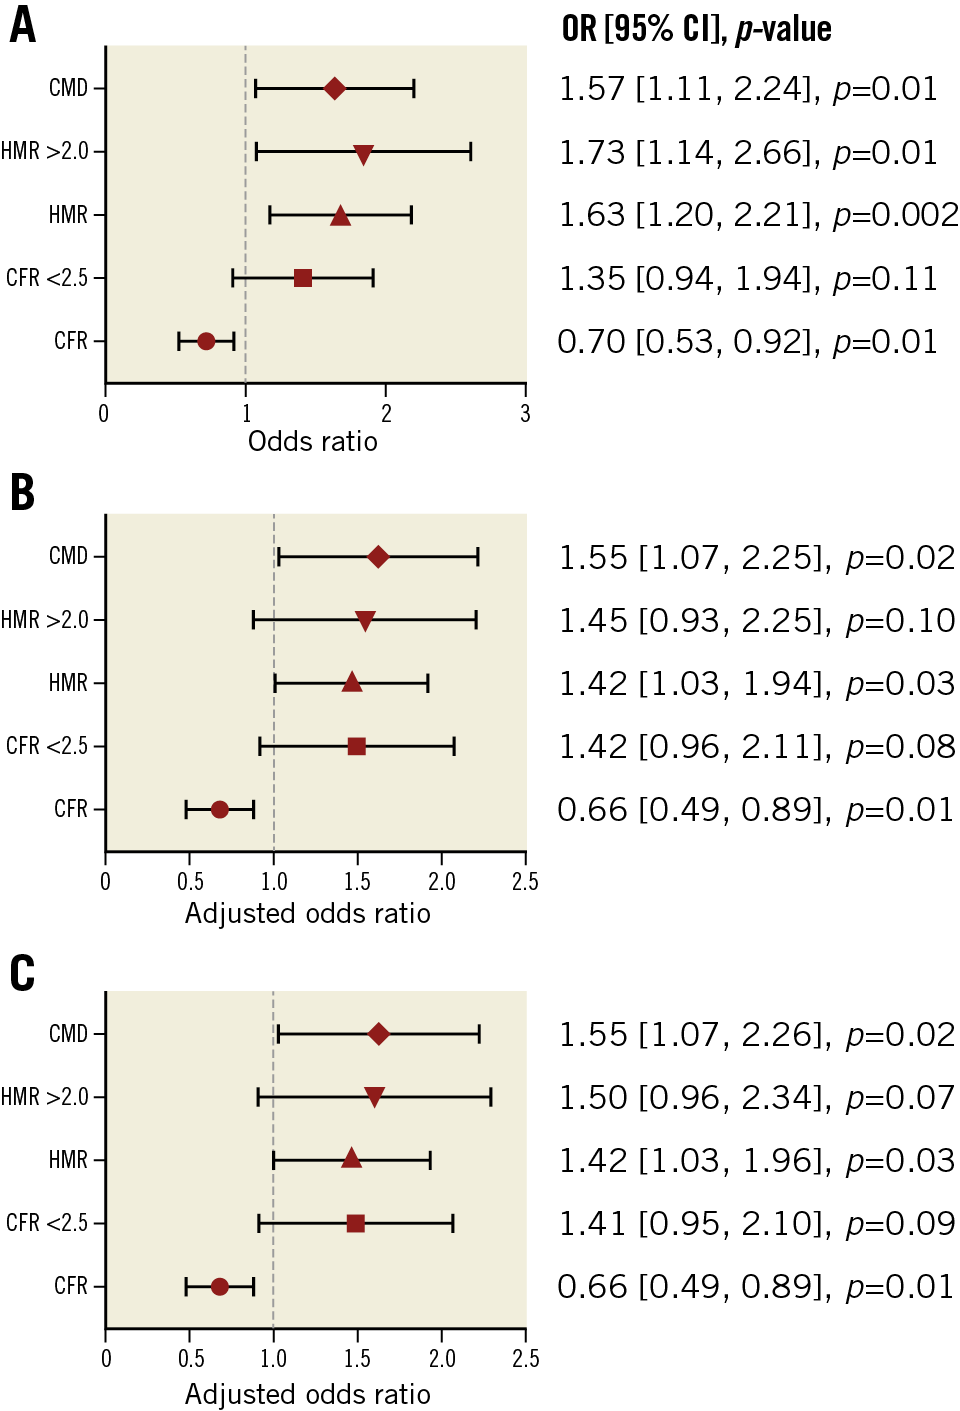 Figure 1. Association between CFR, HMR, and composite MACE. Forest plots showing the association between coronary physiologic parameters (CFR and HMR), CMD, and future risk of MACE. A) Univariate. B) Multivariate (model 1: age and sex). C) Multivariate (model 2: age, sex, hypertension, dyslipidaemia, diabetes mellitus, body mass index, and estimated glomerular filtration rate). CFR: coronary flow reserve; CI: confidence interval; CMD: coronary microvascular dysfunction; HMR: hyperaemic microvascular resistance; MACE: major adverse cardiovascular events; OR: odds ratio